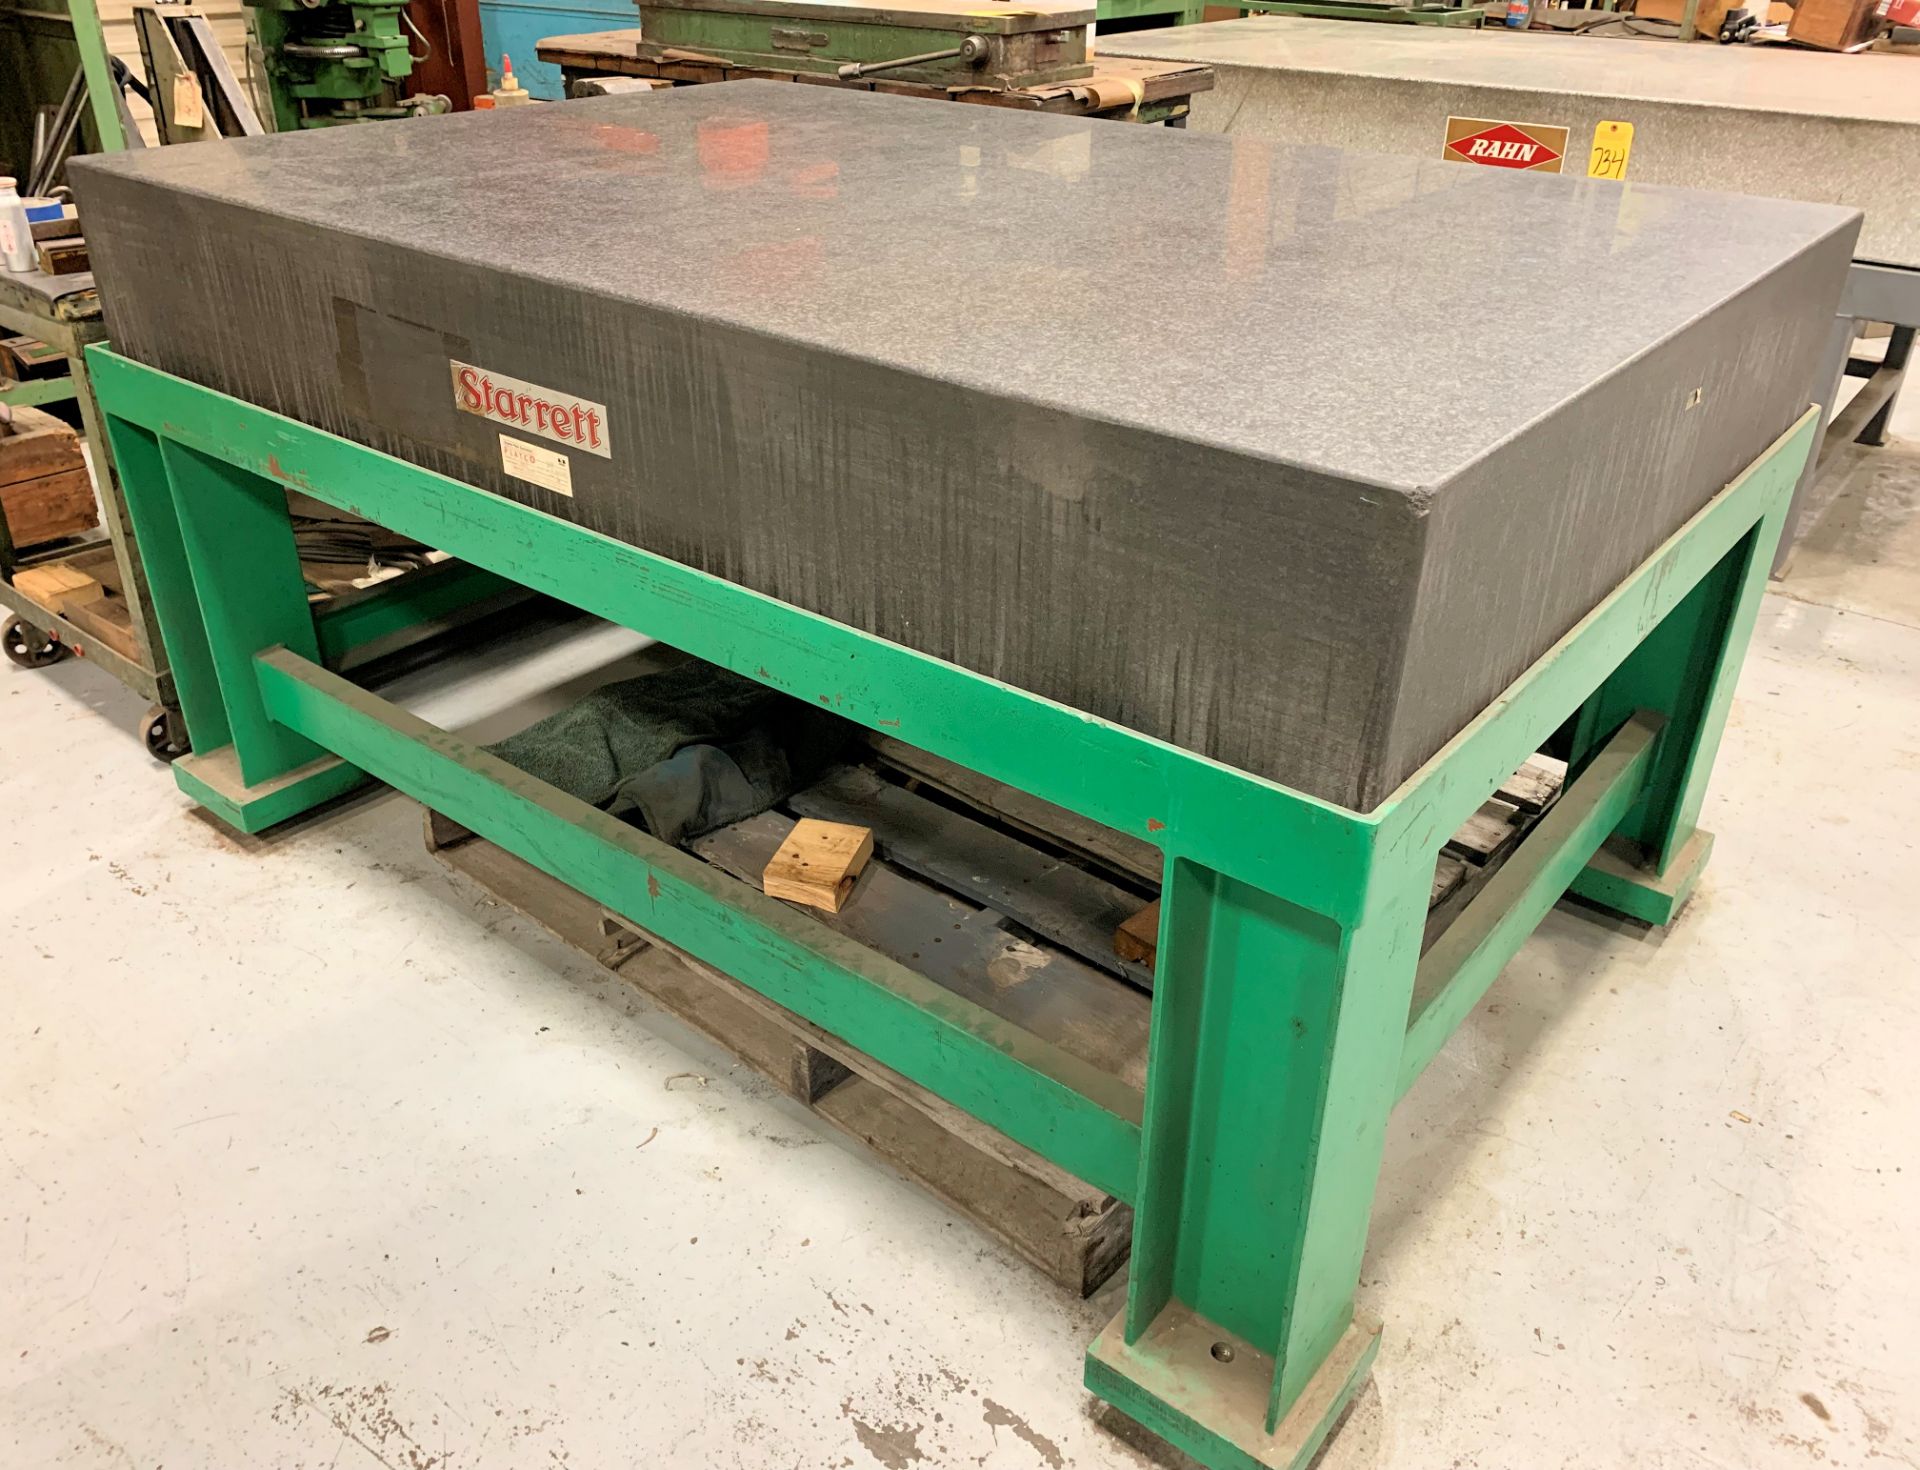 Starrett 48" x 72" x 12" Black Granite Surface Plate with Steel Stand, Loading Fee $150 - Image 2 of 2